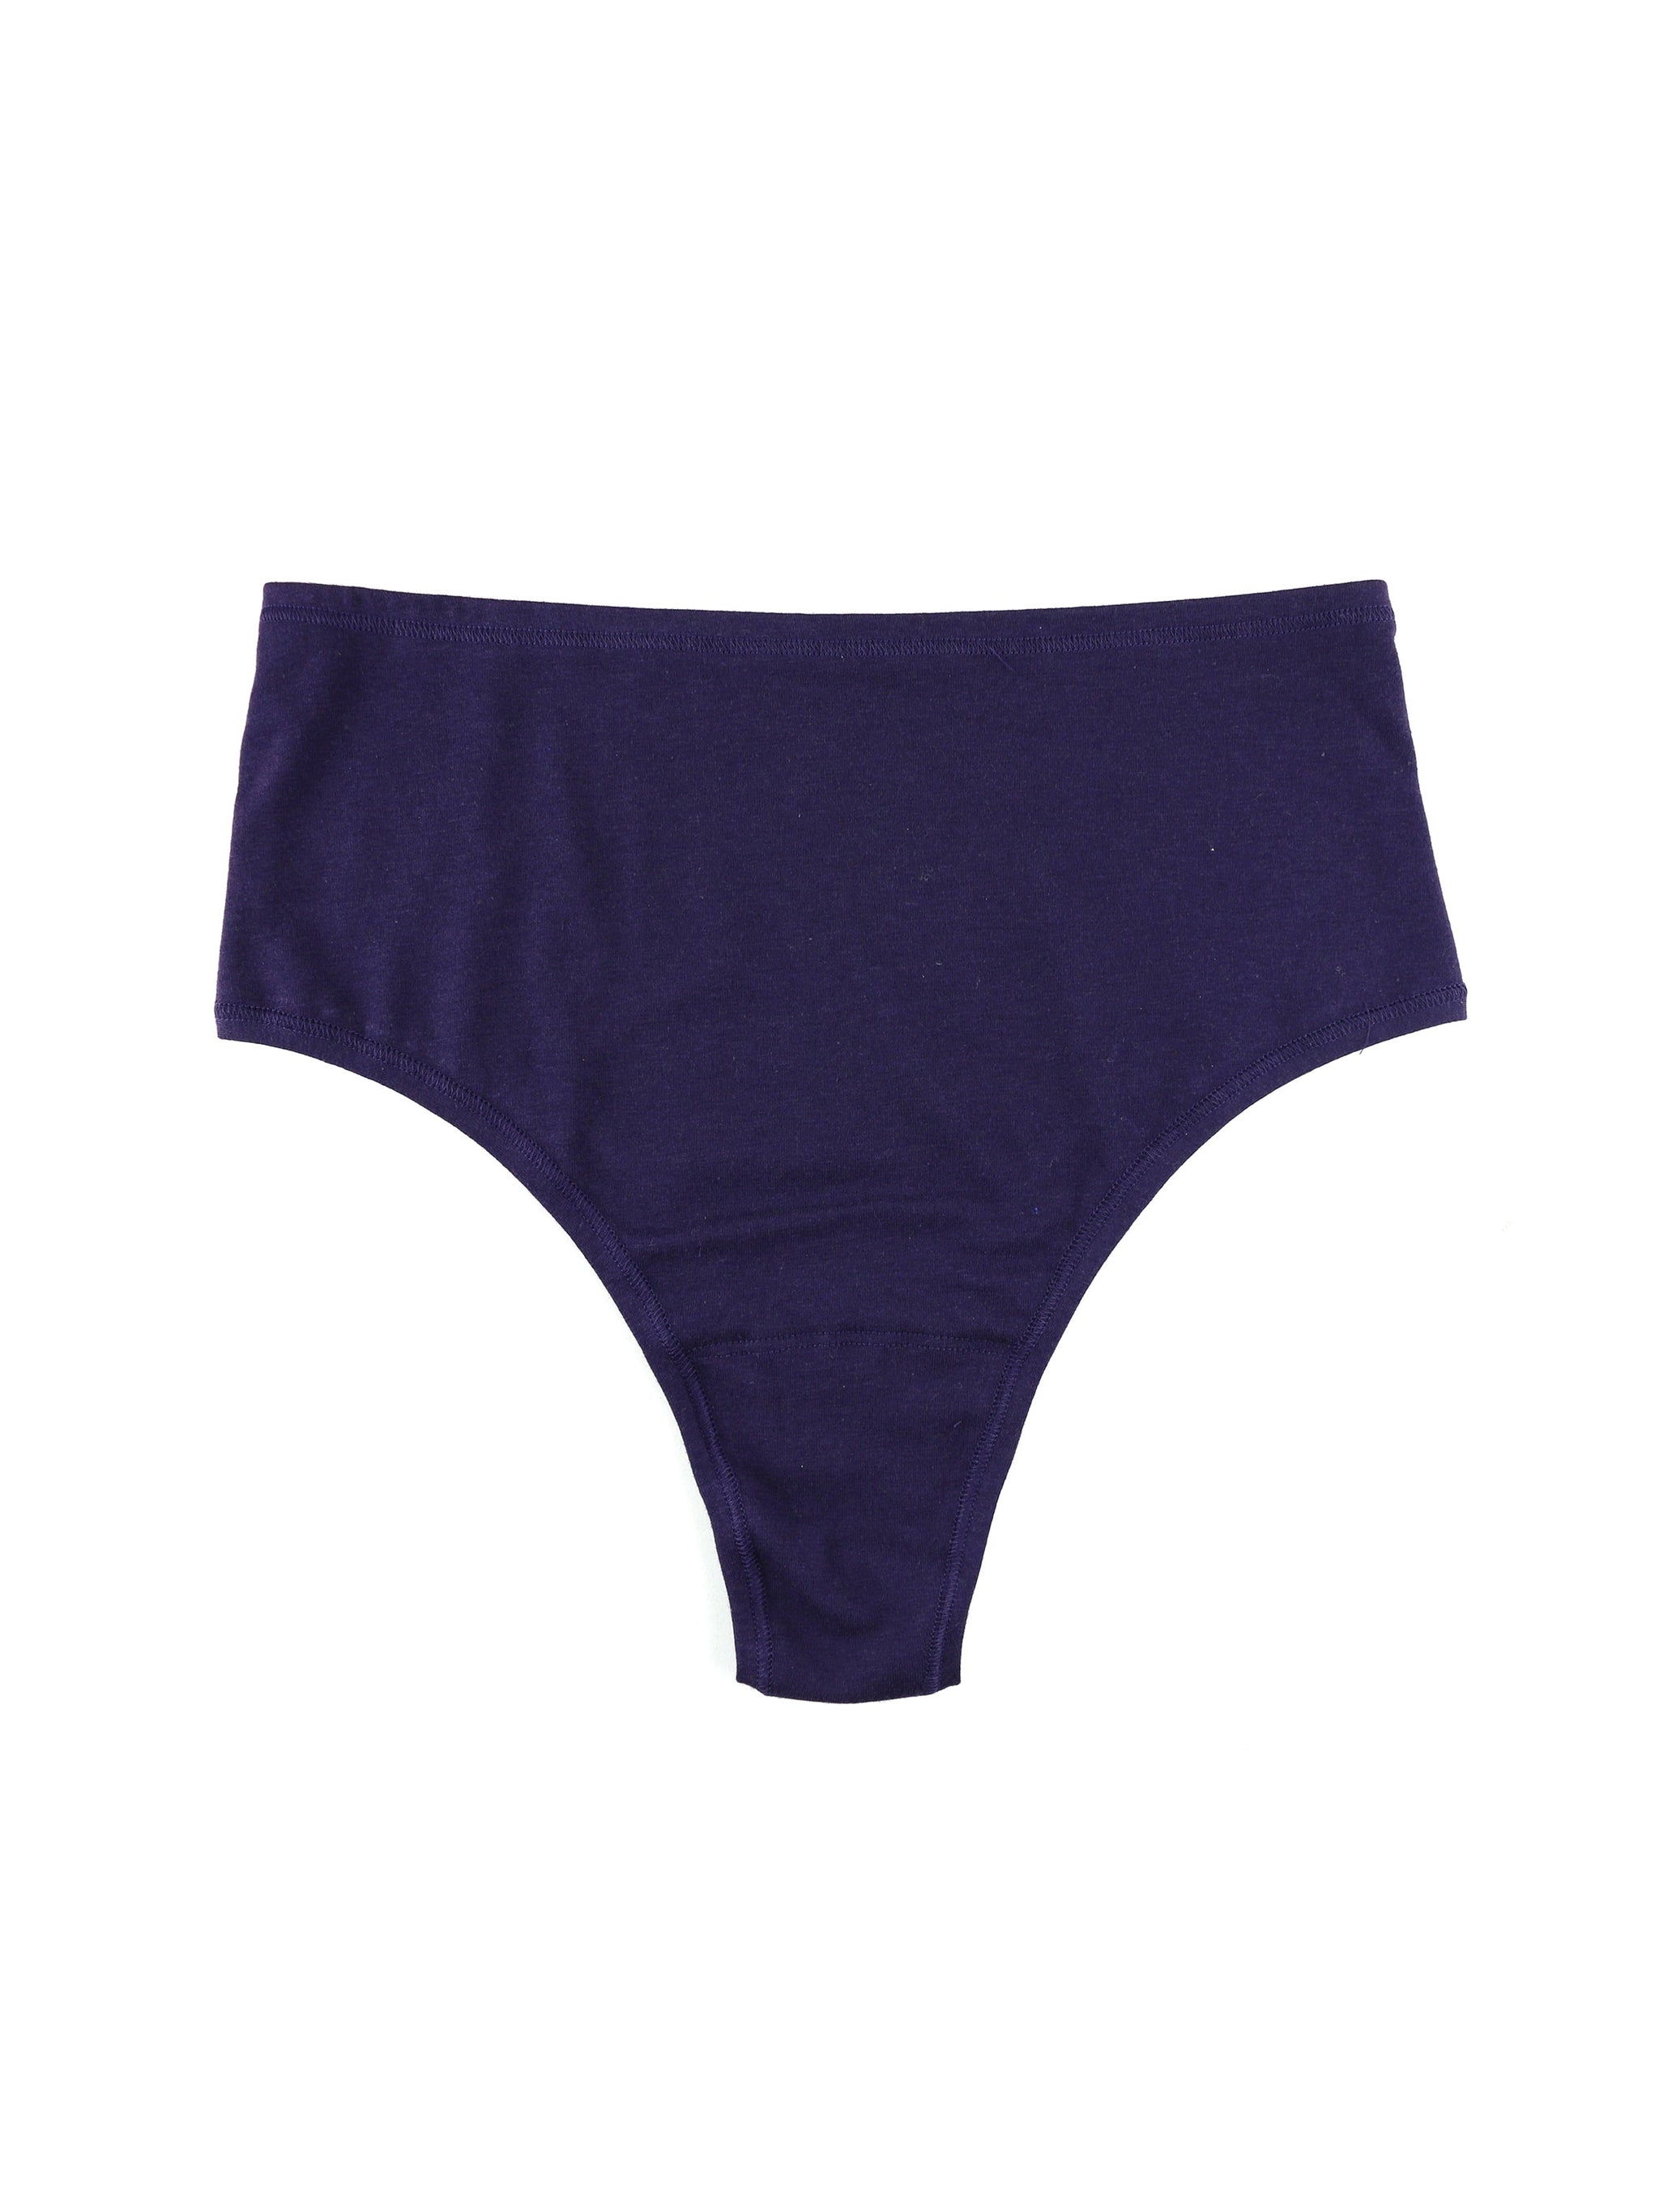 PlayStretch™ Natural Rise Thong Raw Amethyst Purple